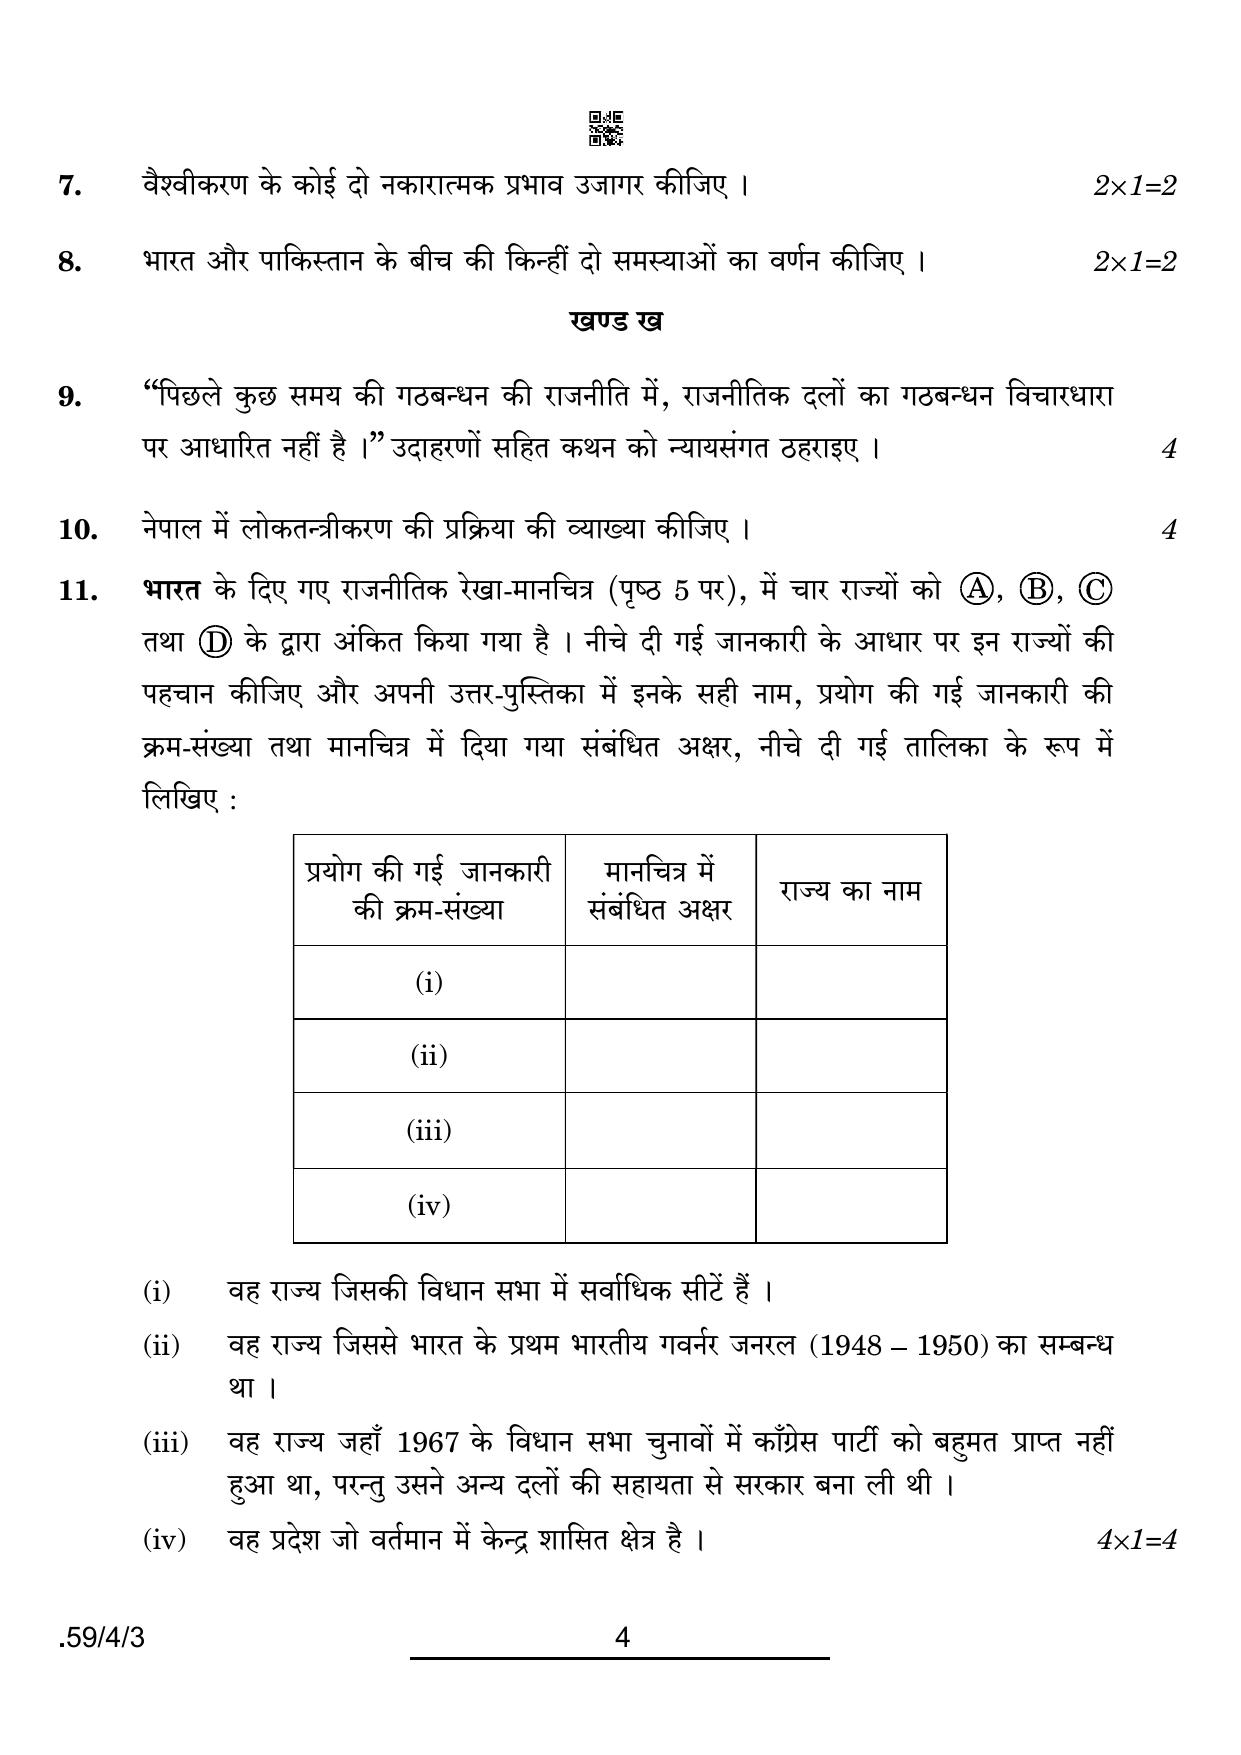 CBSE Class 12 59-4-3 Political Science 2022 Question Paper - Page 4